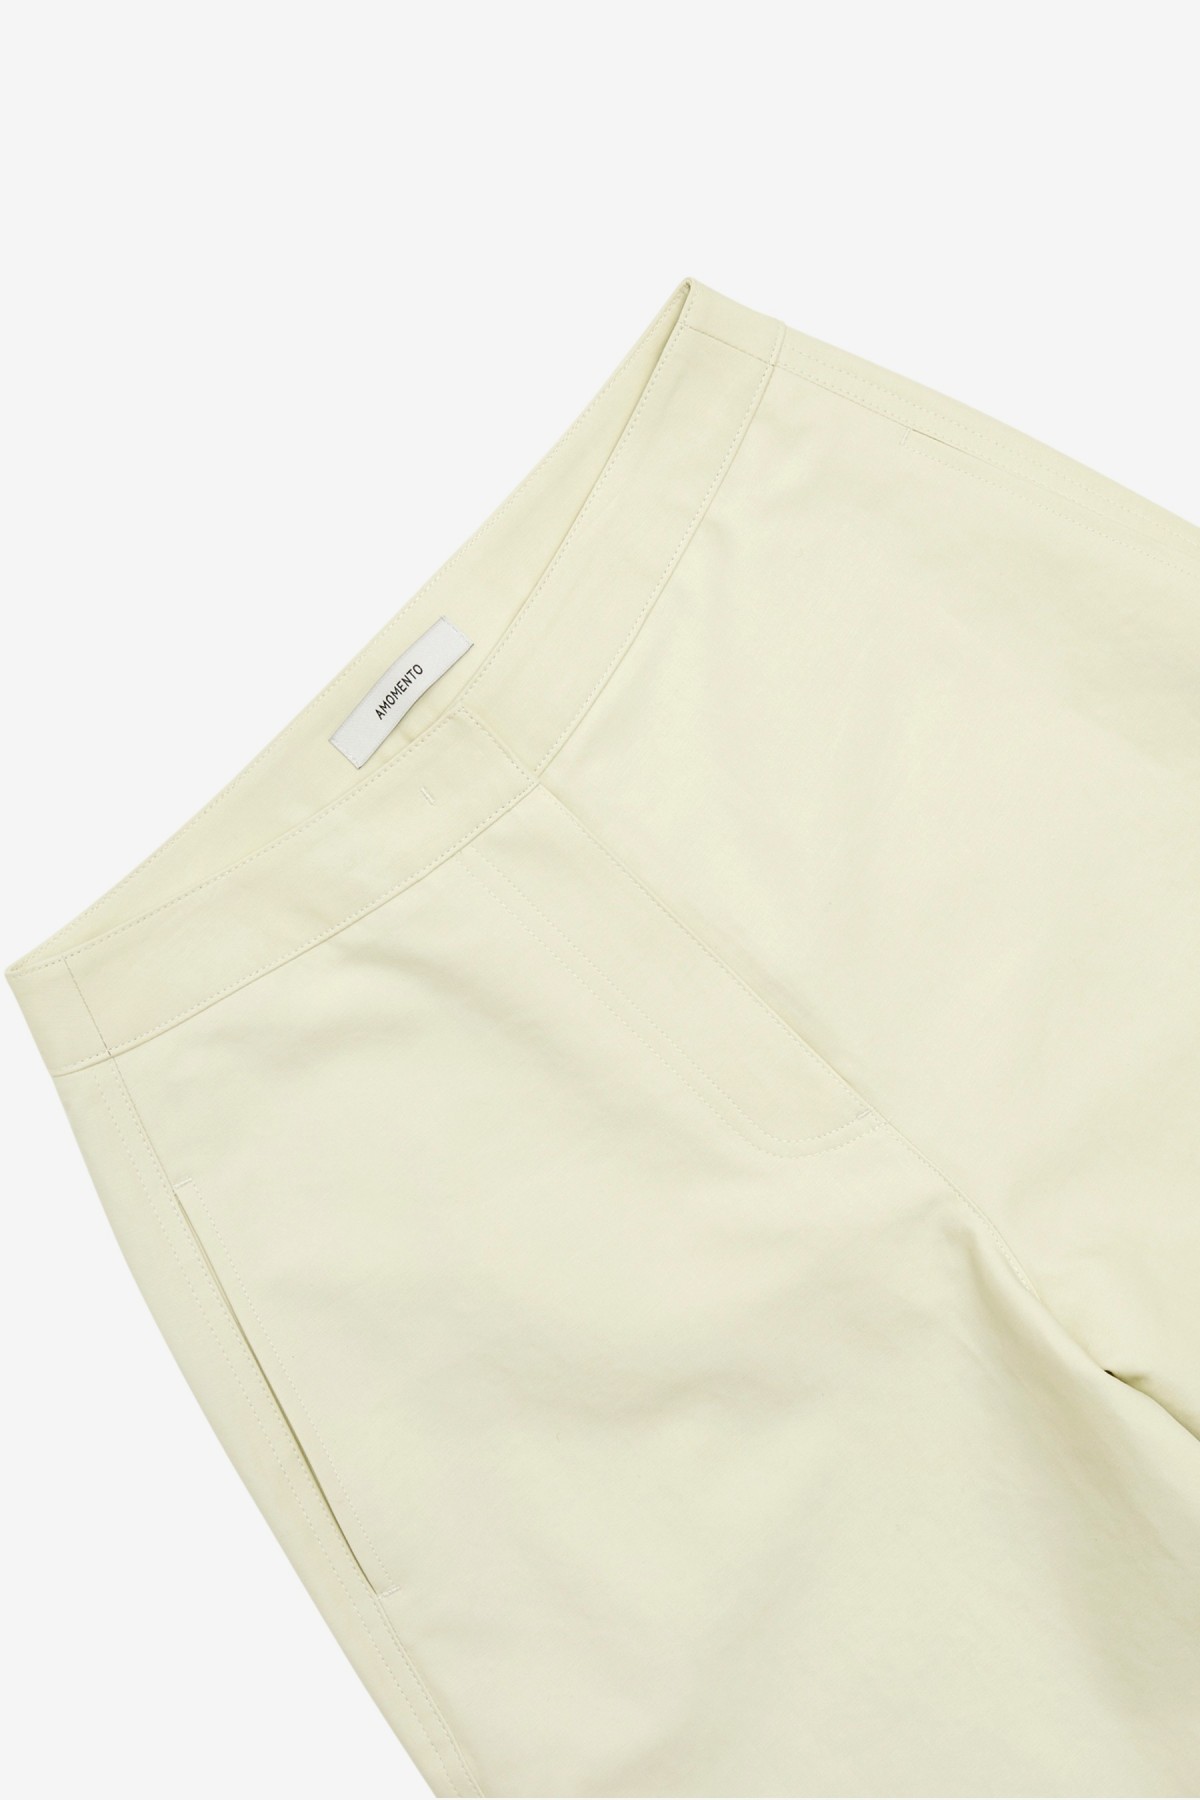 Amomento Curved Leg Pants in Ivory